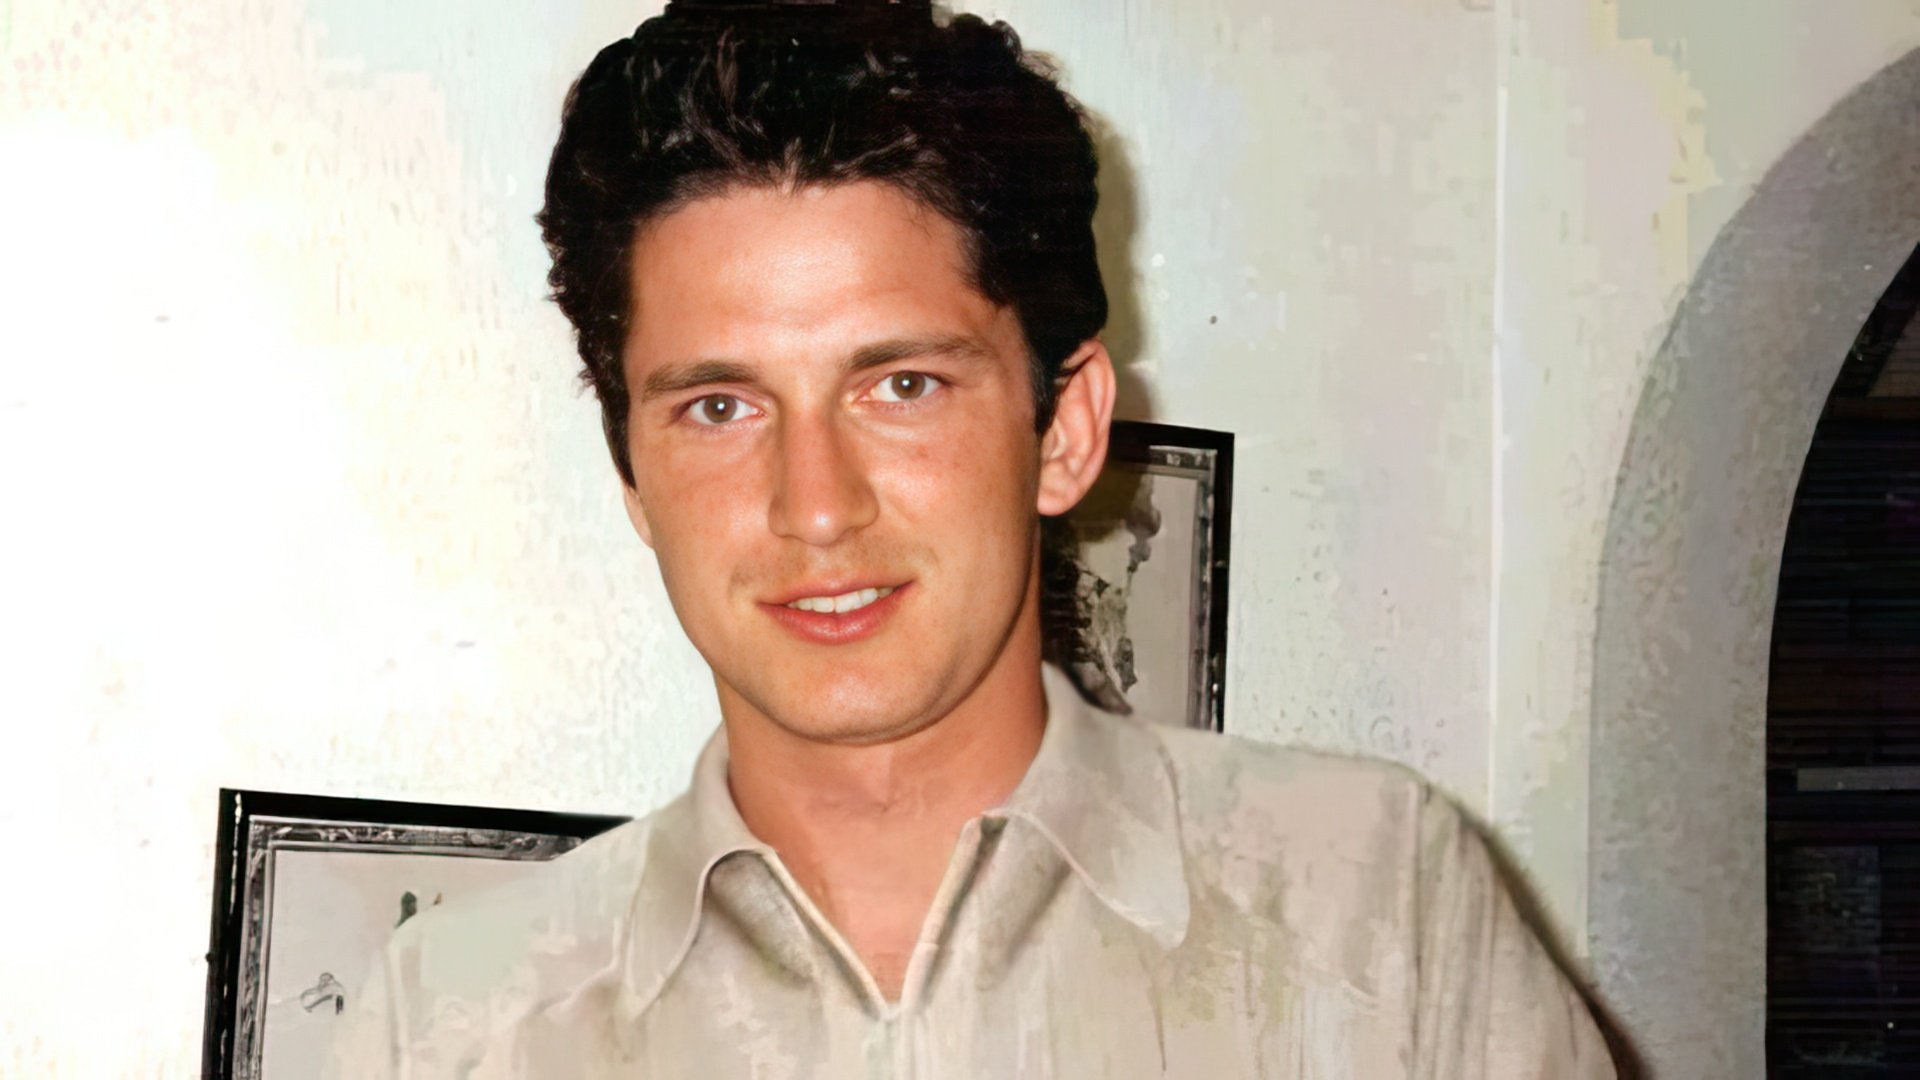 Gerard Butler in his youth